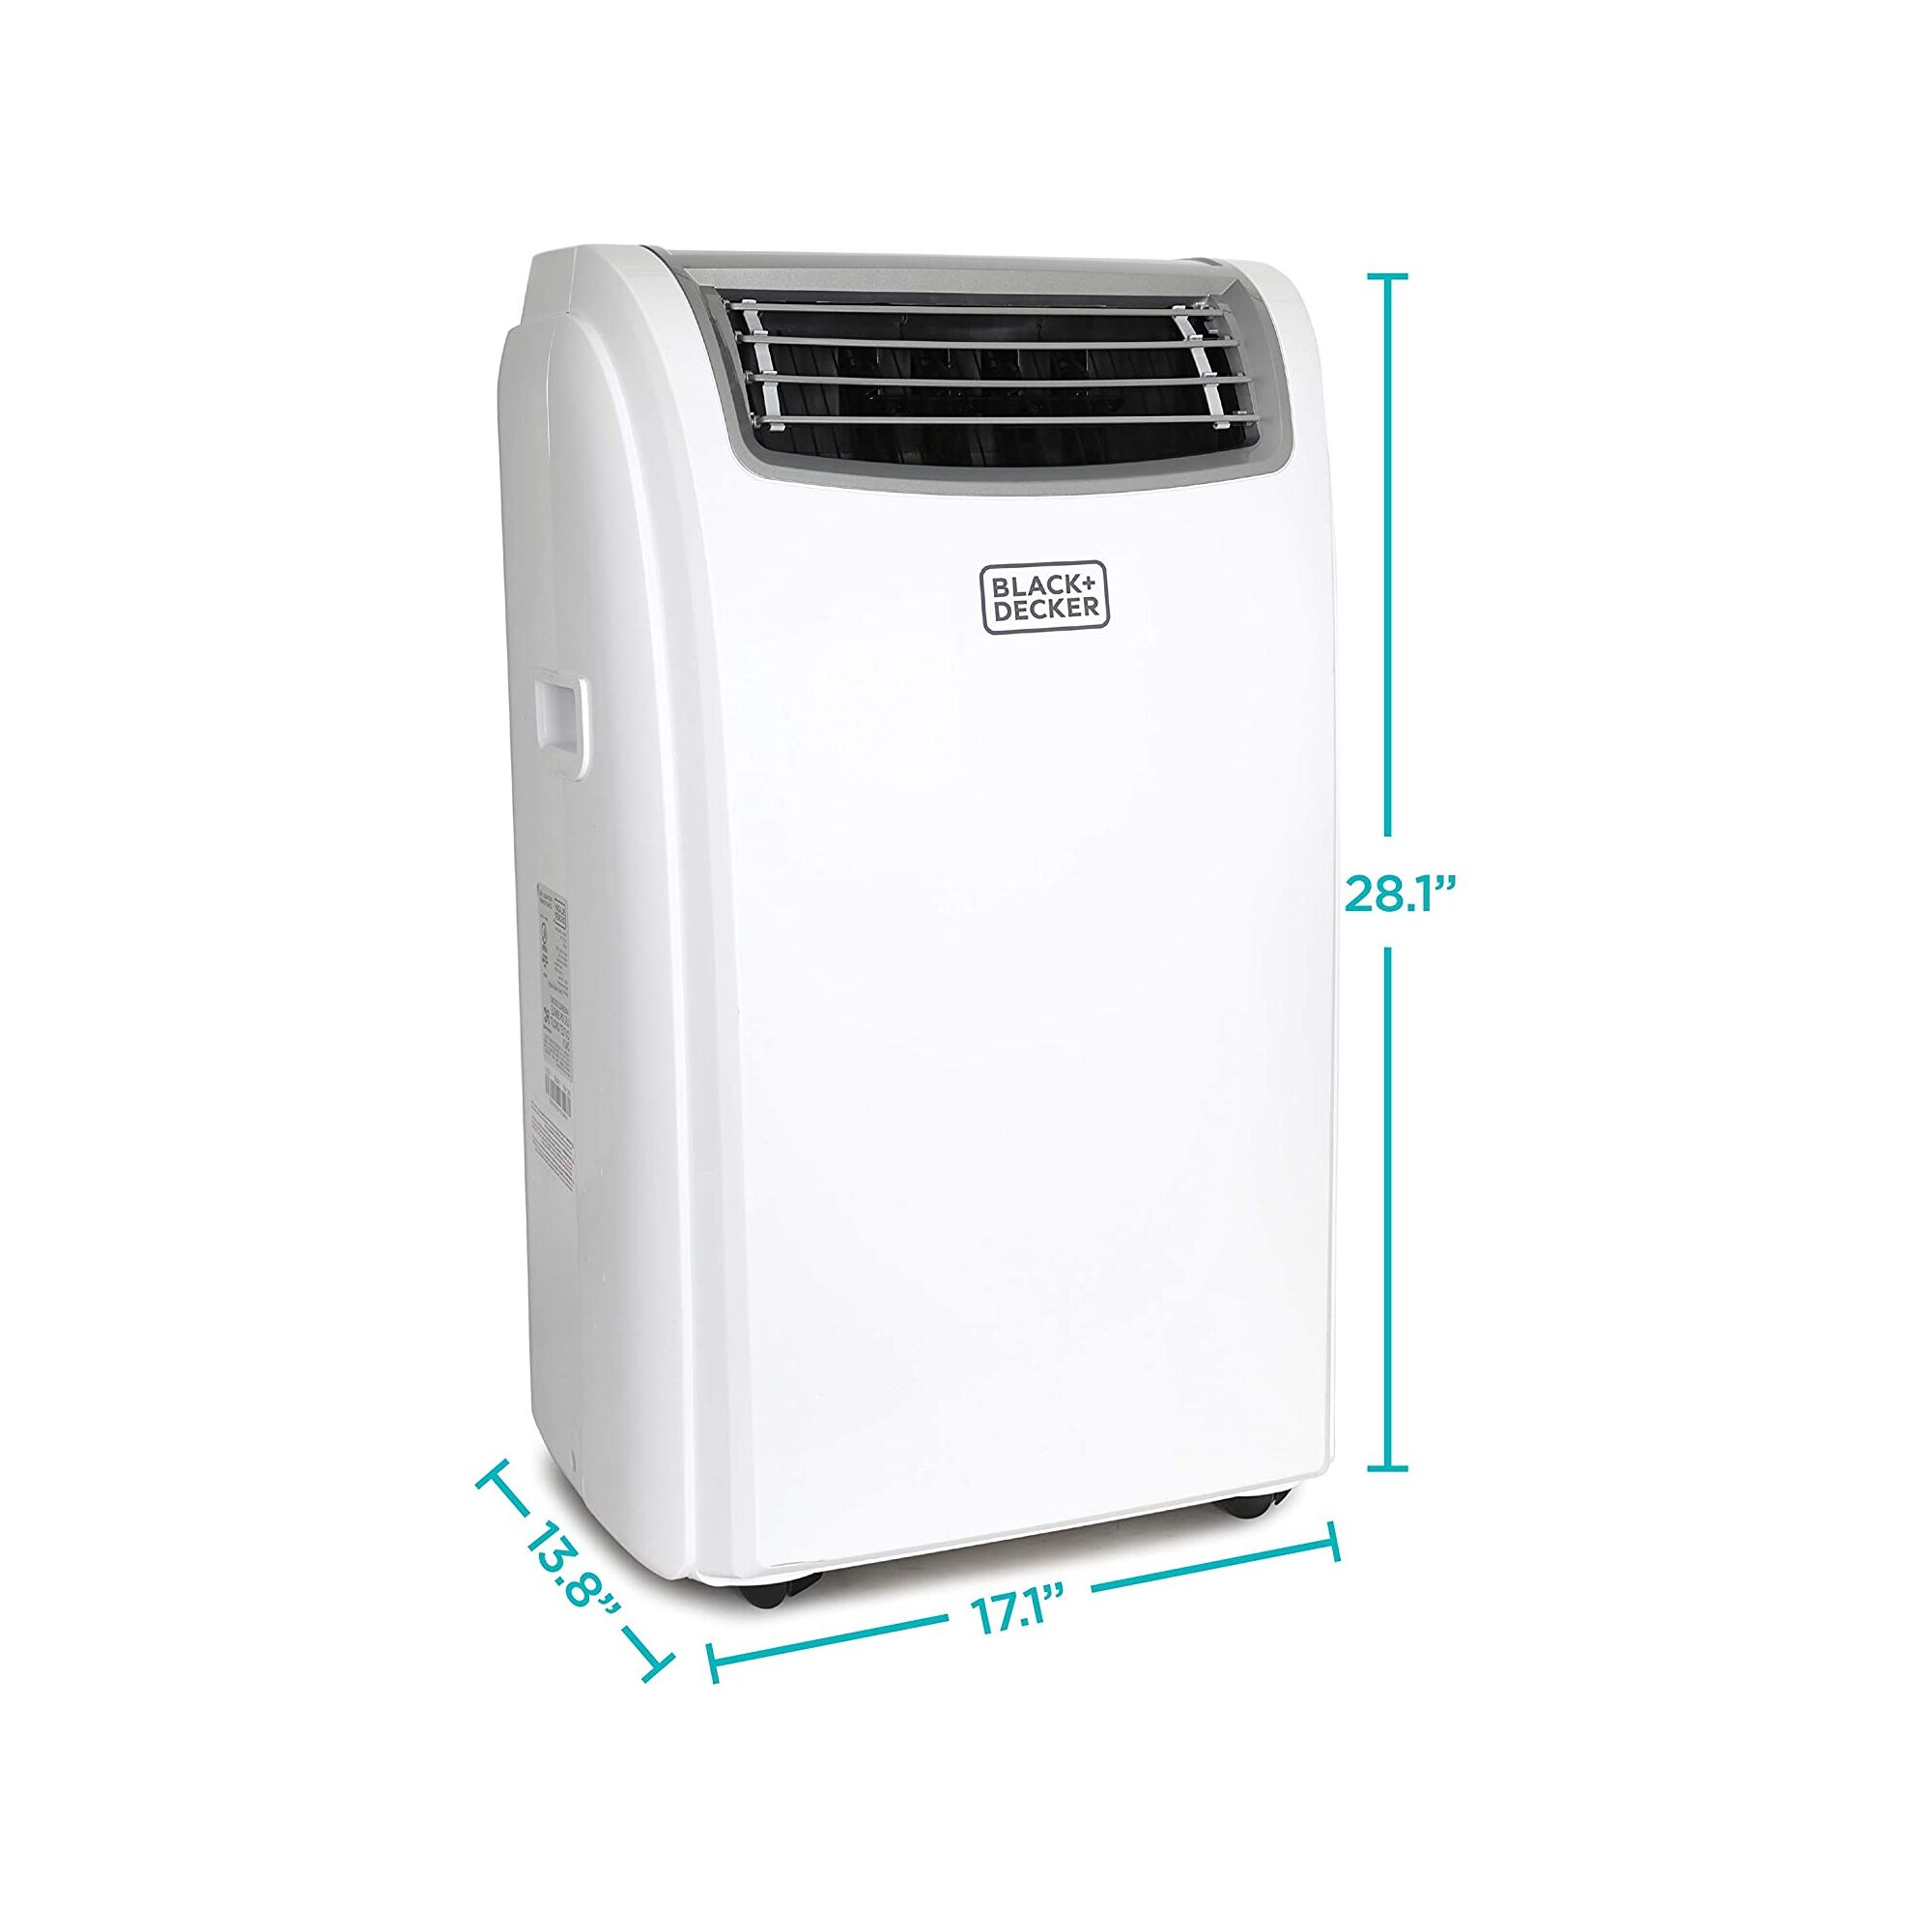 28.1 inch by 17.1 inch x 13.8 inch Portable Air Conditioner With Heat